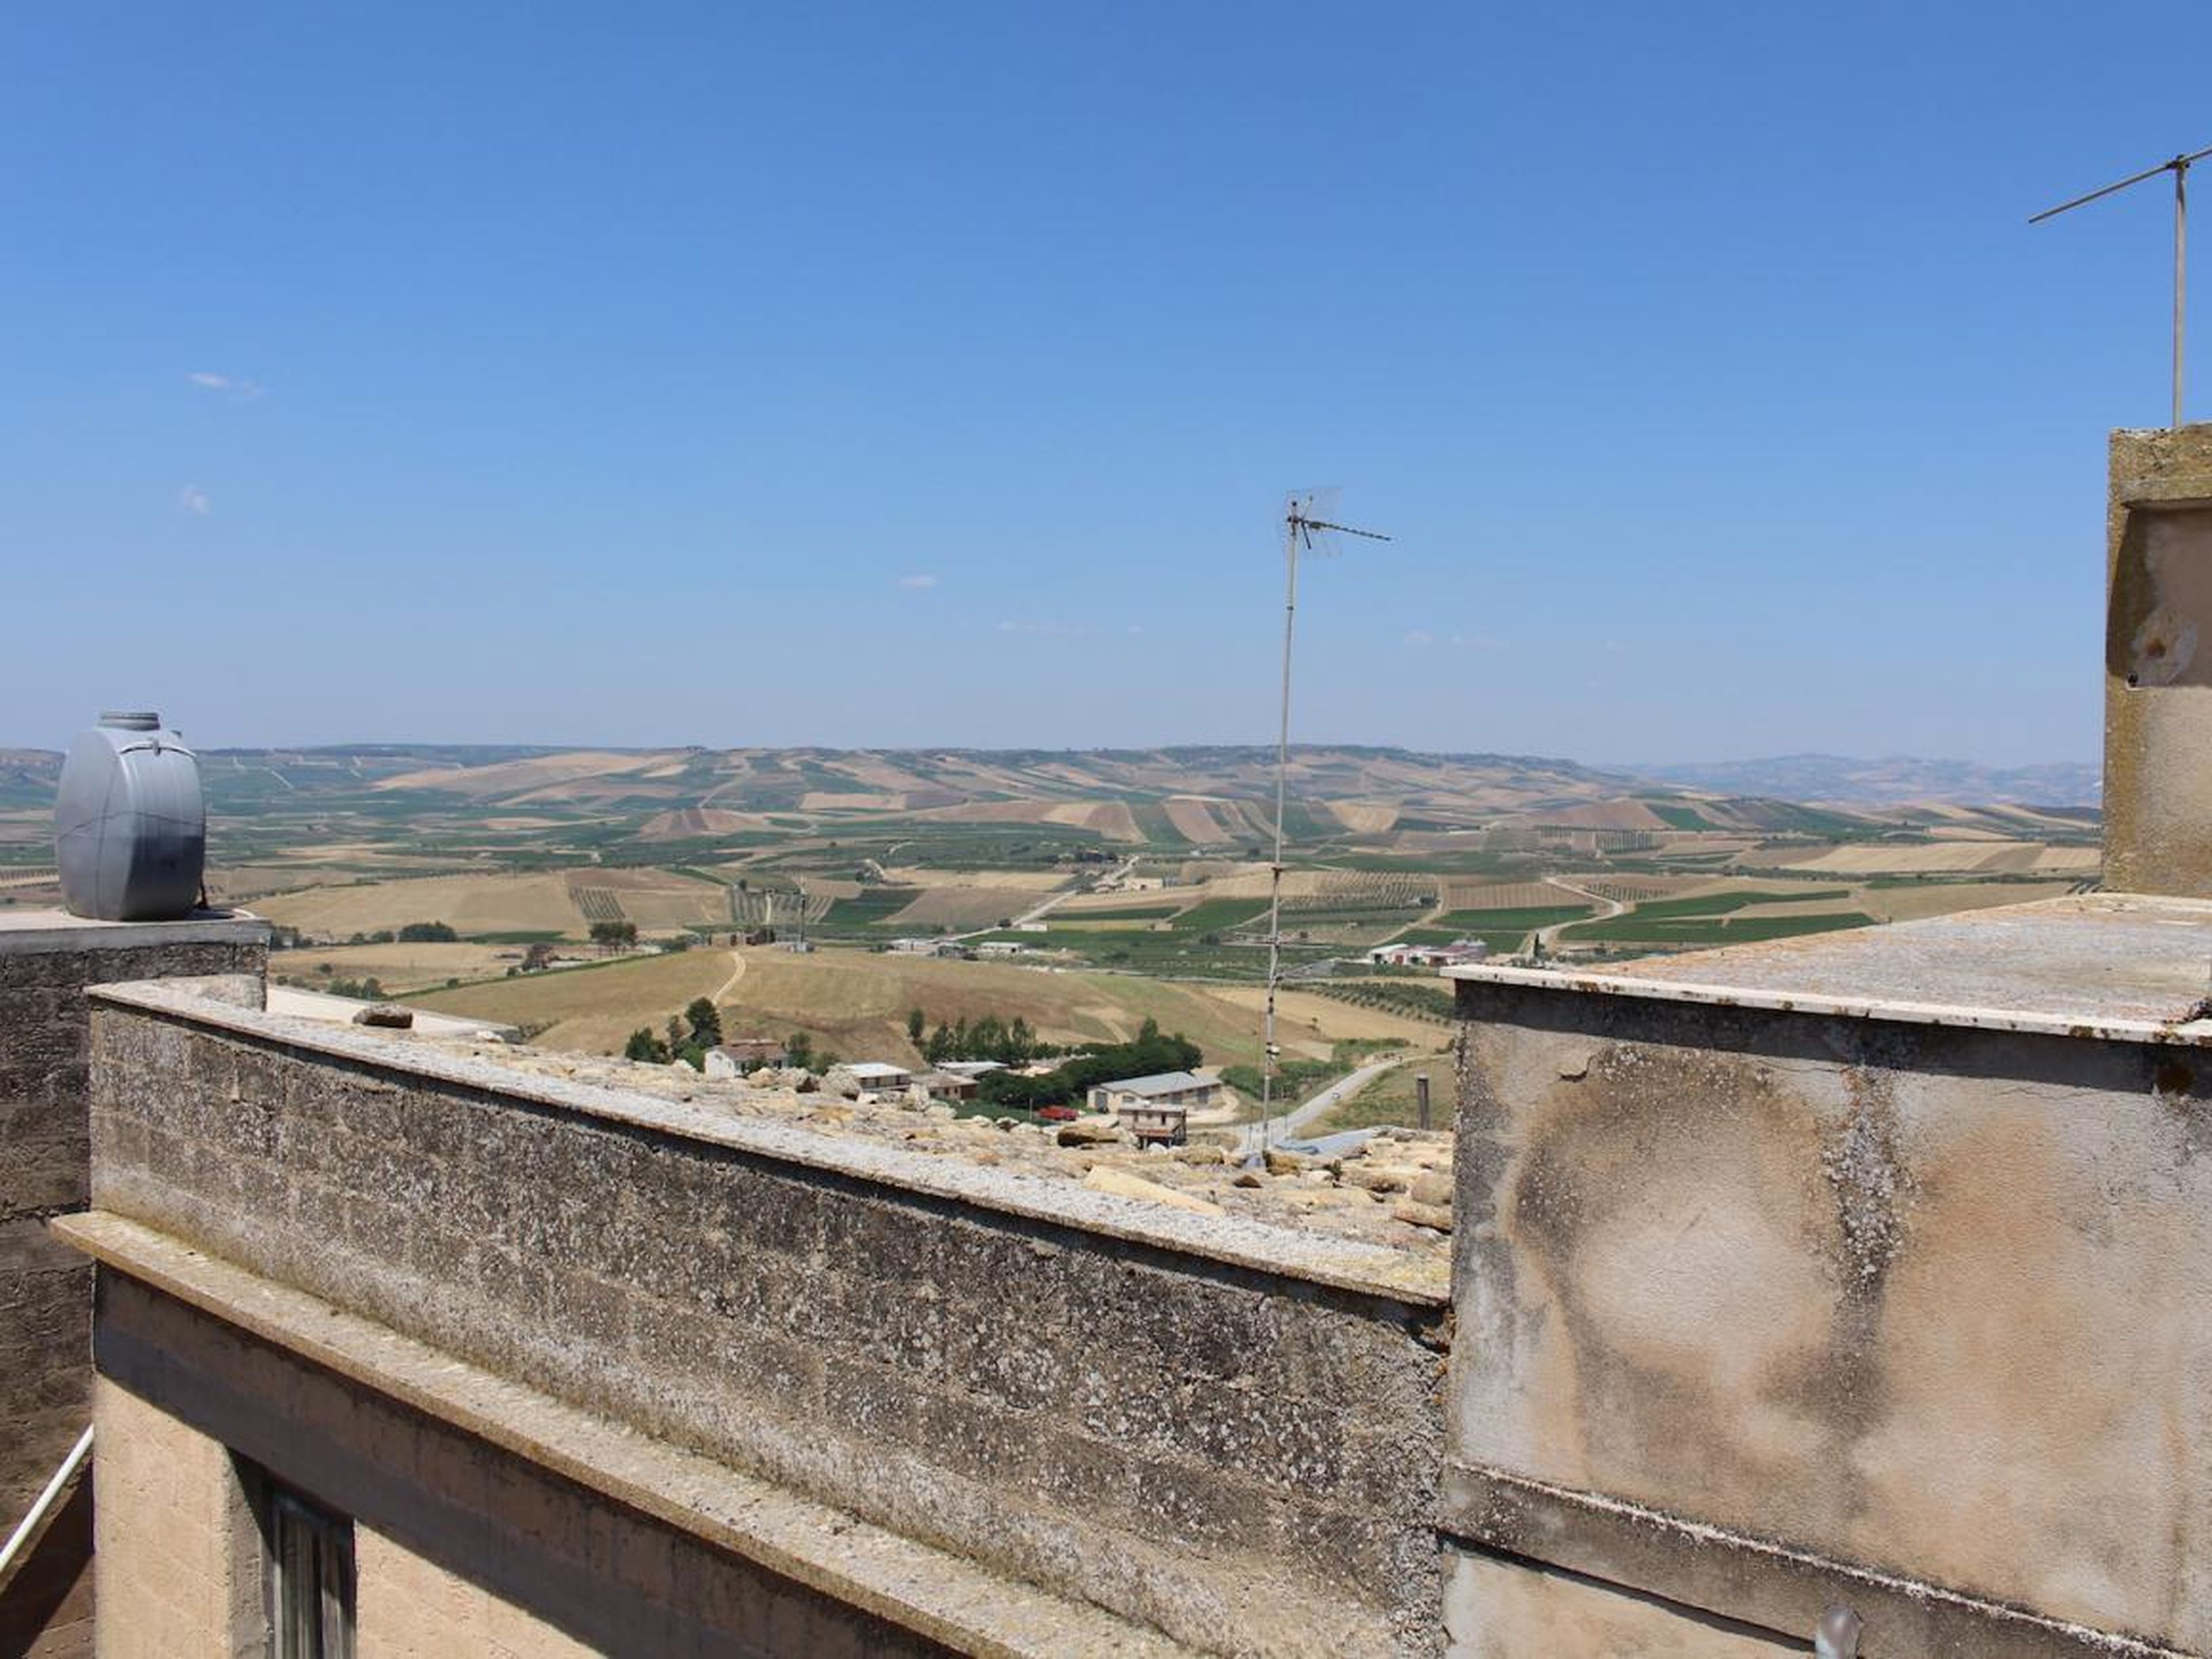 The real selling point of the property was the roof terrace, which boasted stunning views of the Sicilian countryside.